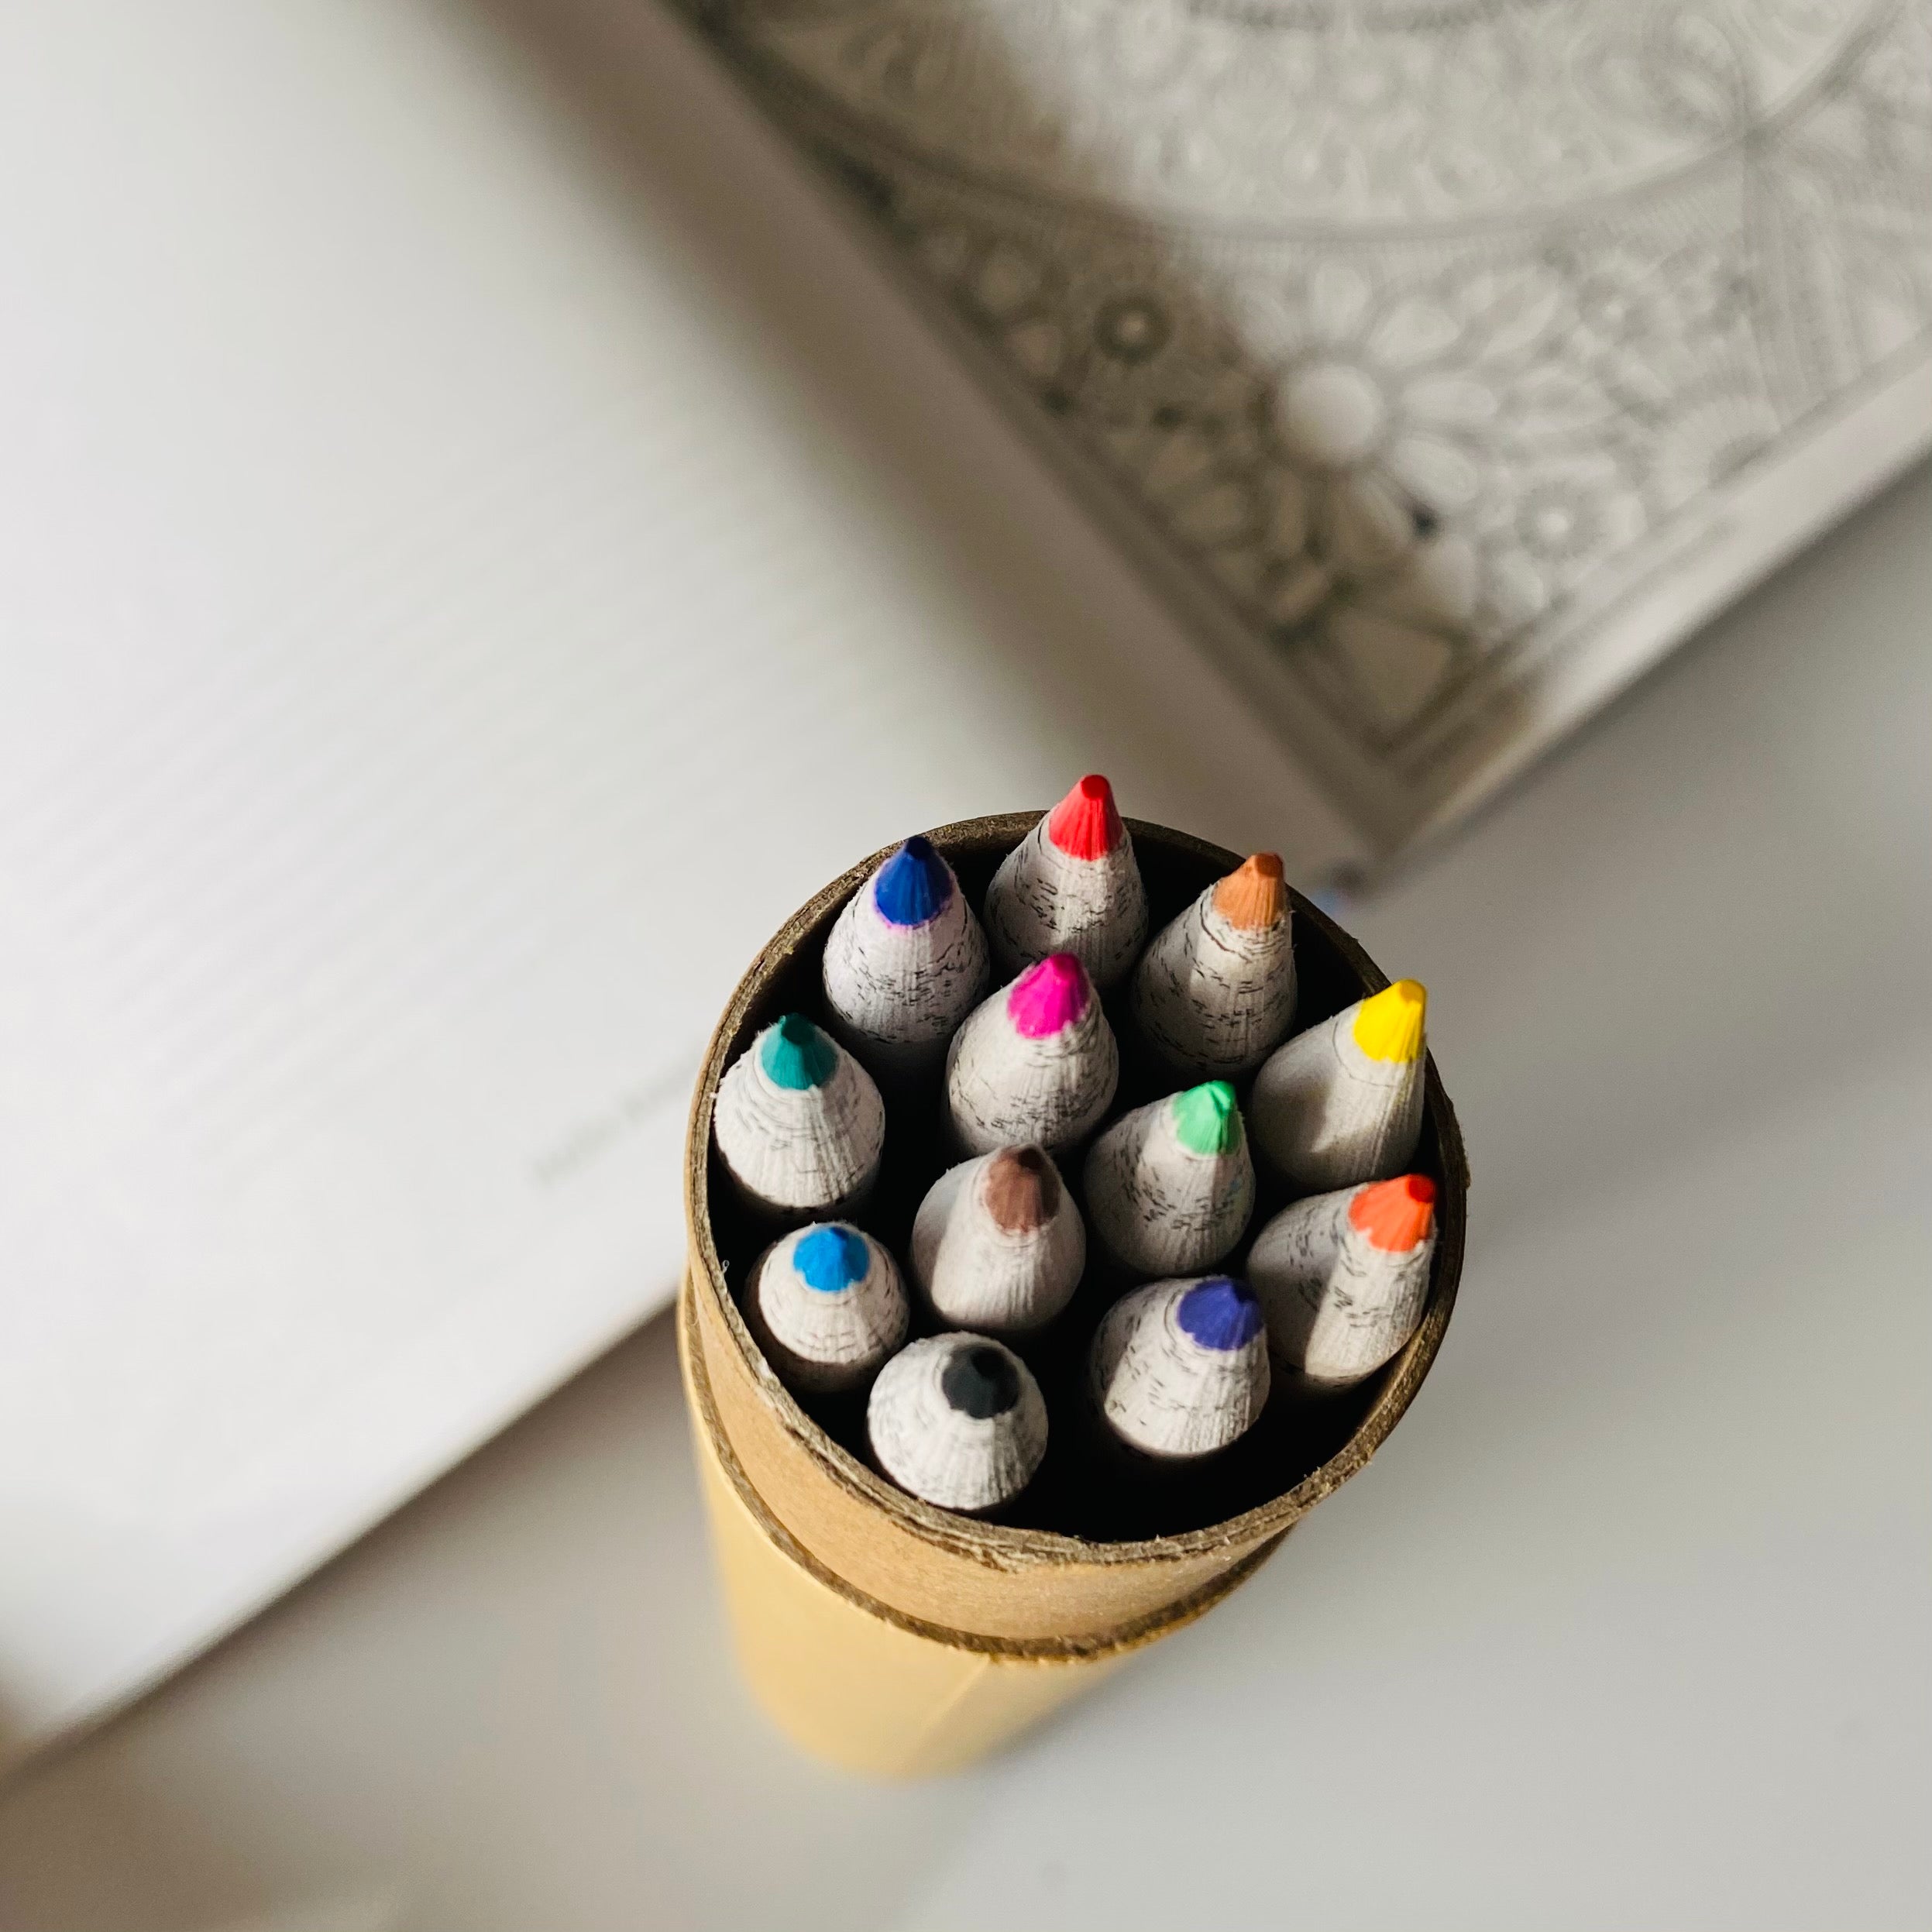 Color Relax Coloring Book & Colored Pencils – Me To You Box